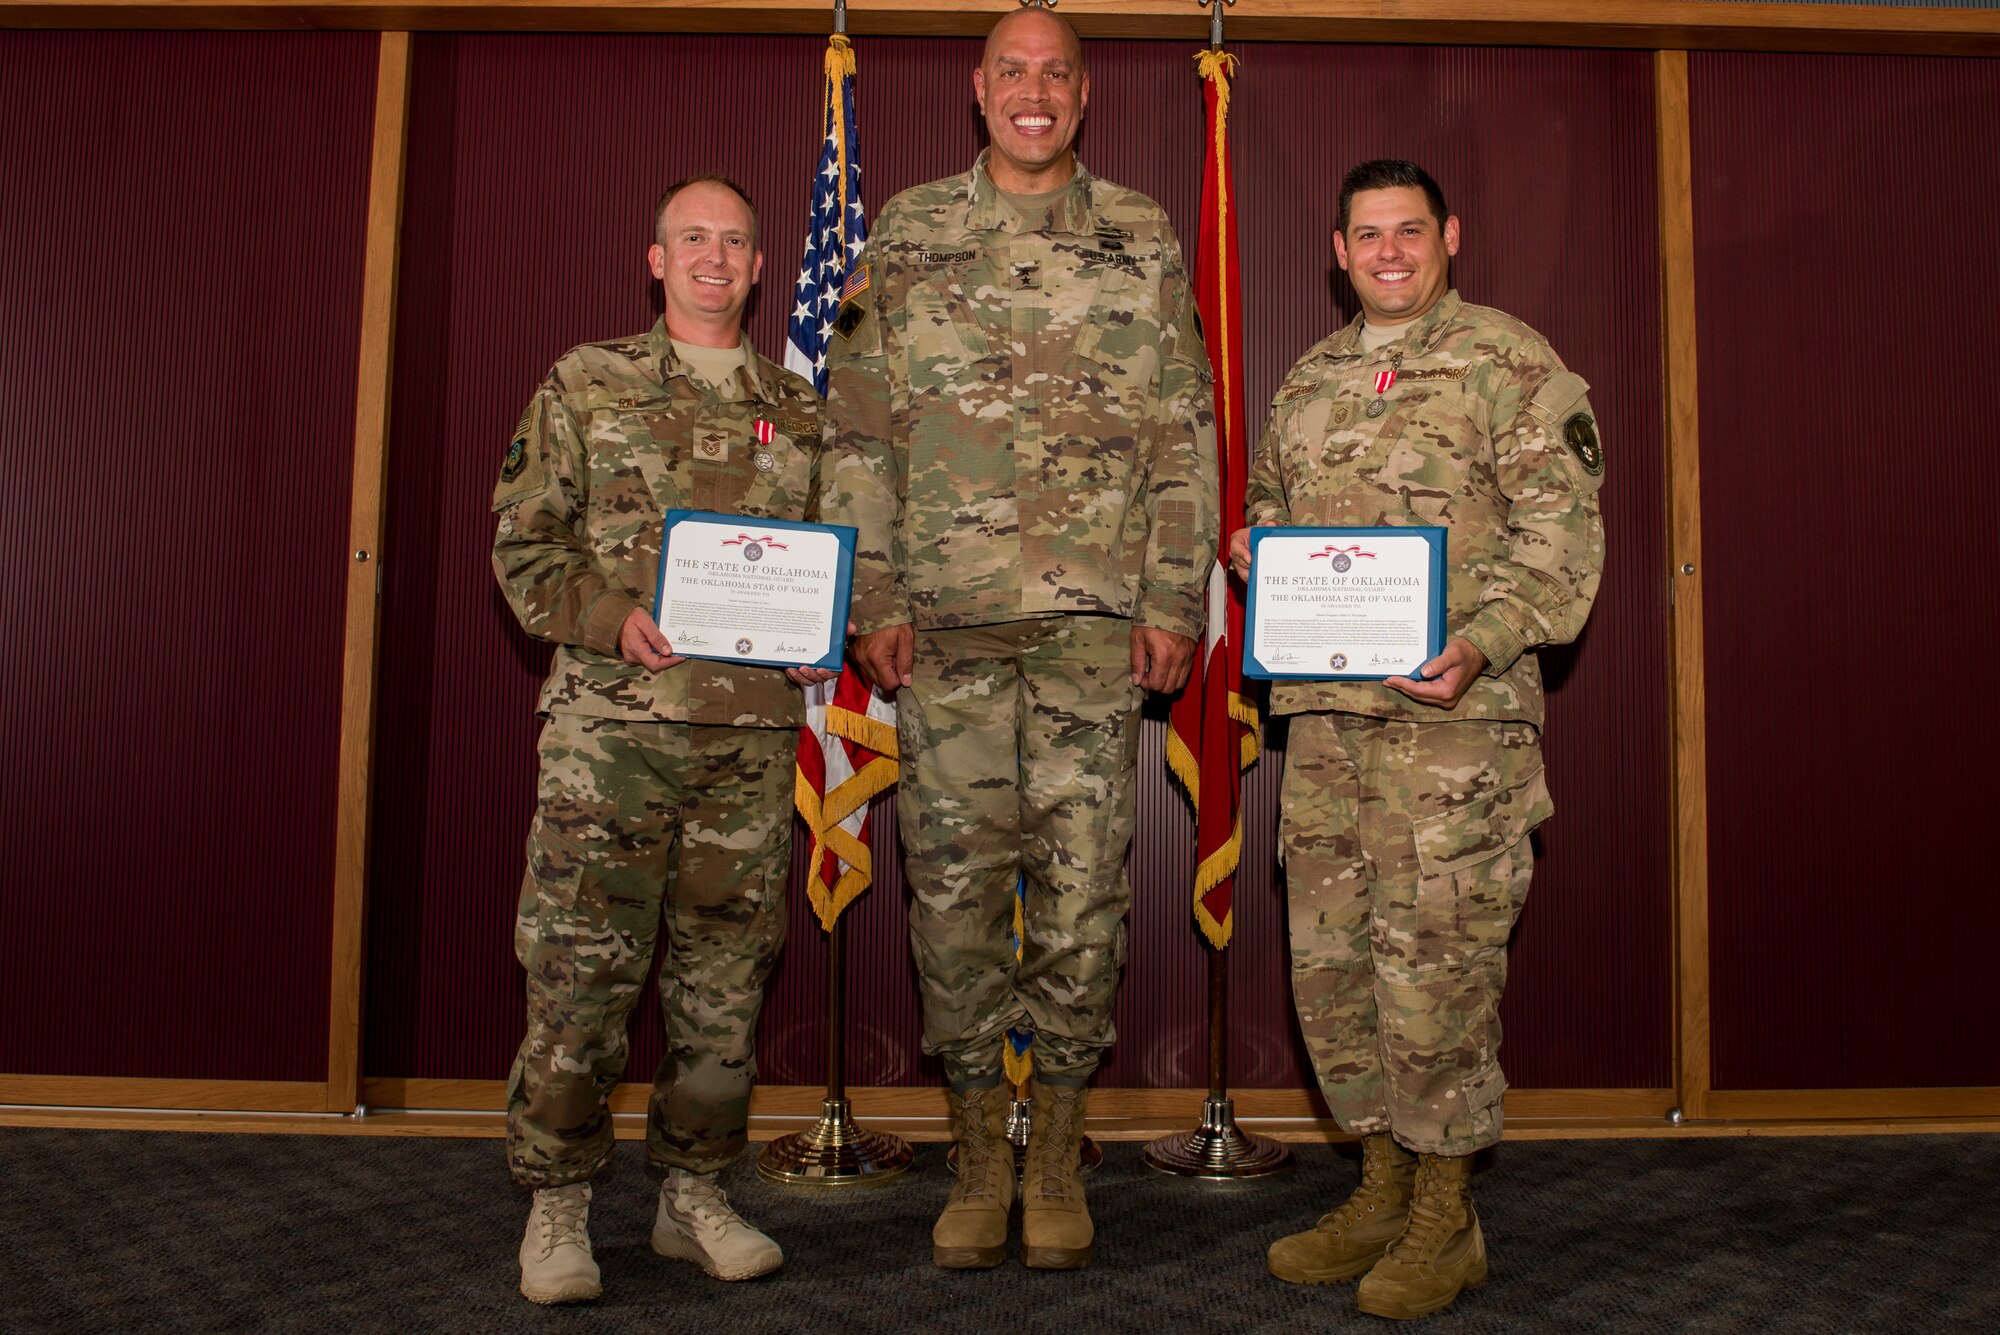 Master Sgt. Casey Ray (left), 285th Special Operations Intelligence Squadron (SOIS) intelligence analyst,  Major General Michael Thompson, Adjutant General for Oklahoma, and Master Sgt. Adam Hinsperger (right), 285th SOIS intelligence analyst, pose during an award ceremony Aug. 4, 2018, at Will Rogers Air National Guard Base, Oklahoma City.